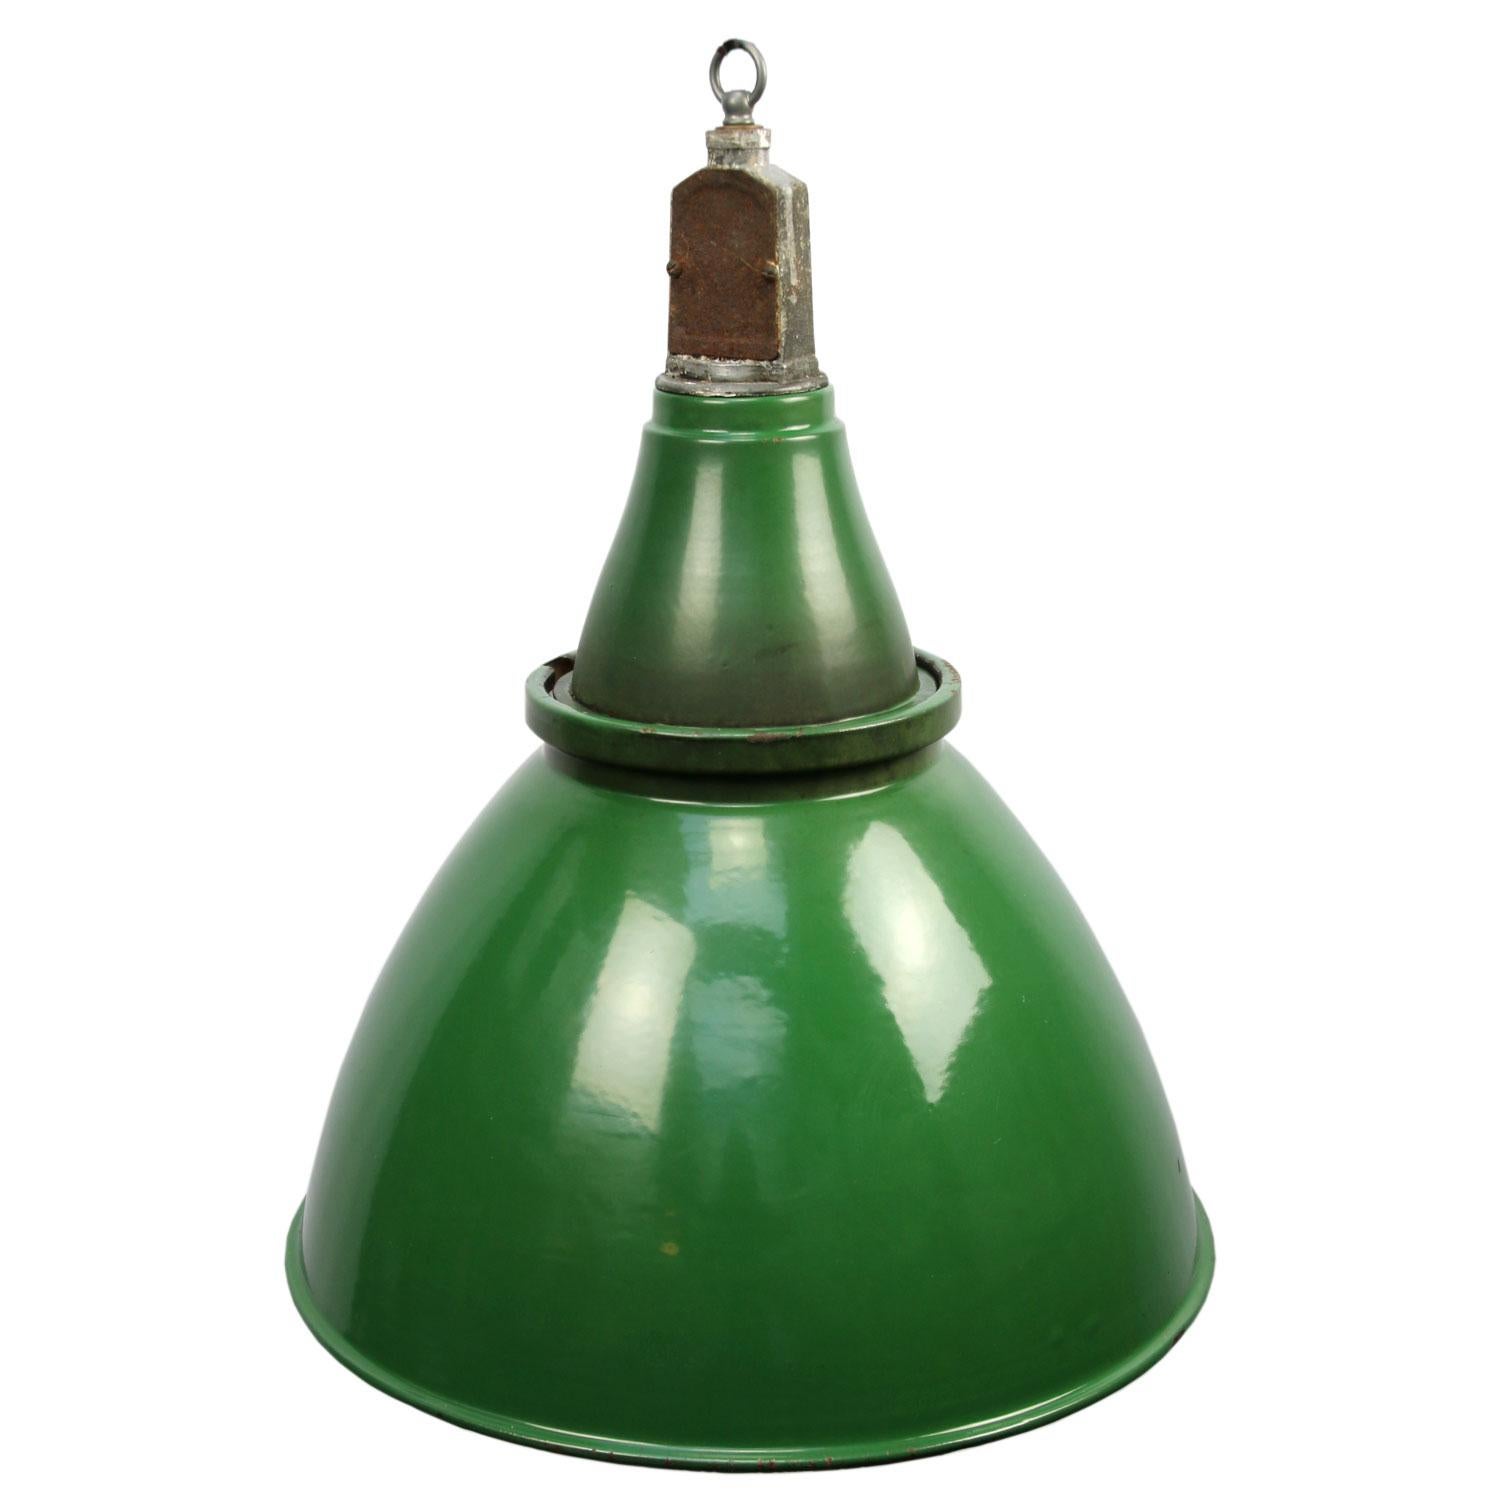 British vintage industrial pendant. Green enamel with white interior. 

Weight: 3.3 kg / 7.3 lb

Priced per individual item. All lamps have been made suitable by international standards for incandescent light bulbs, energy-efficient and LED